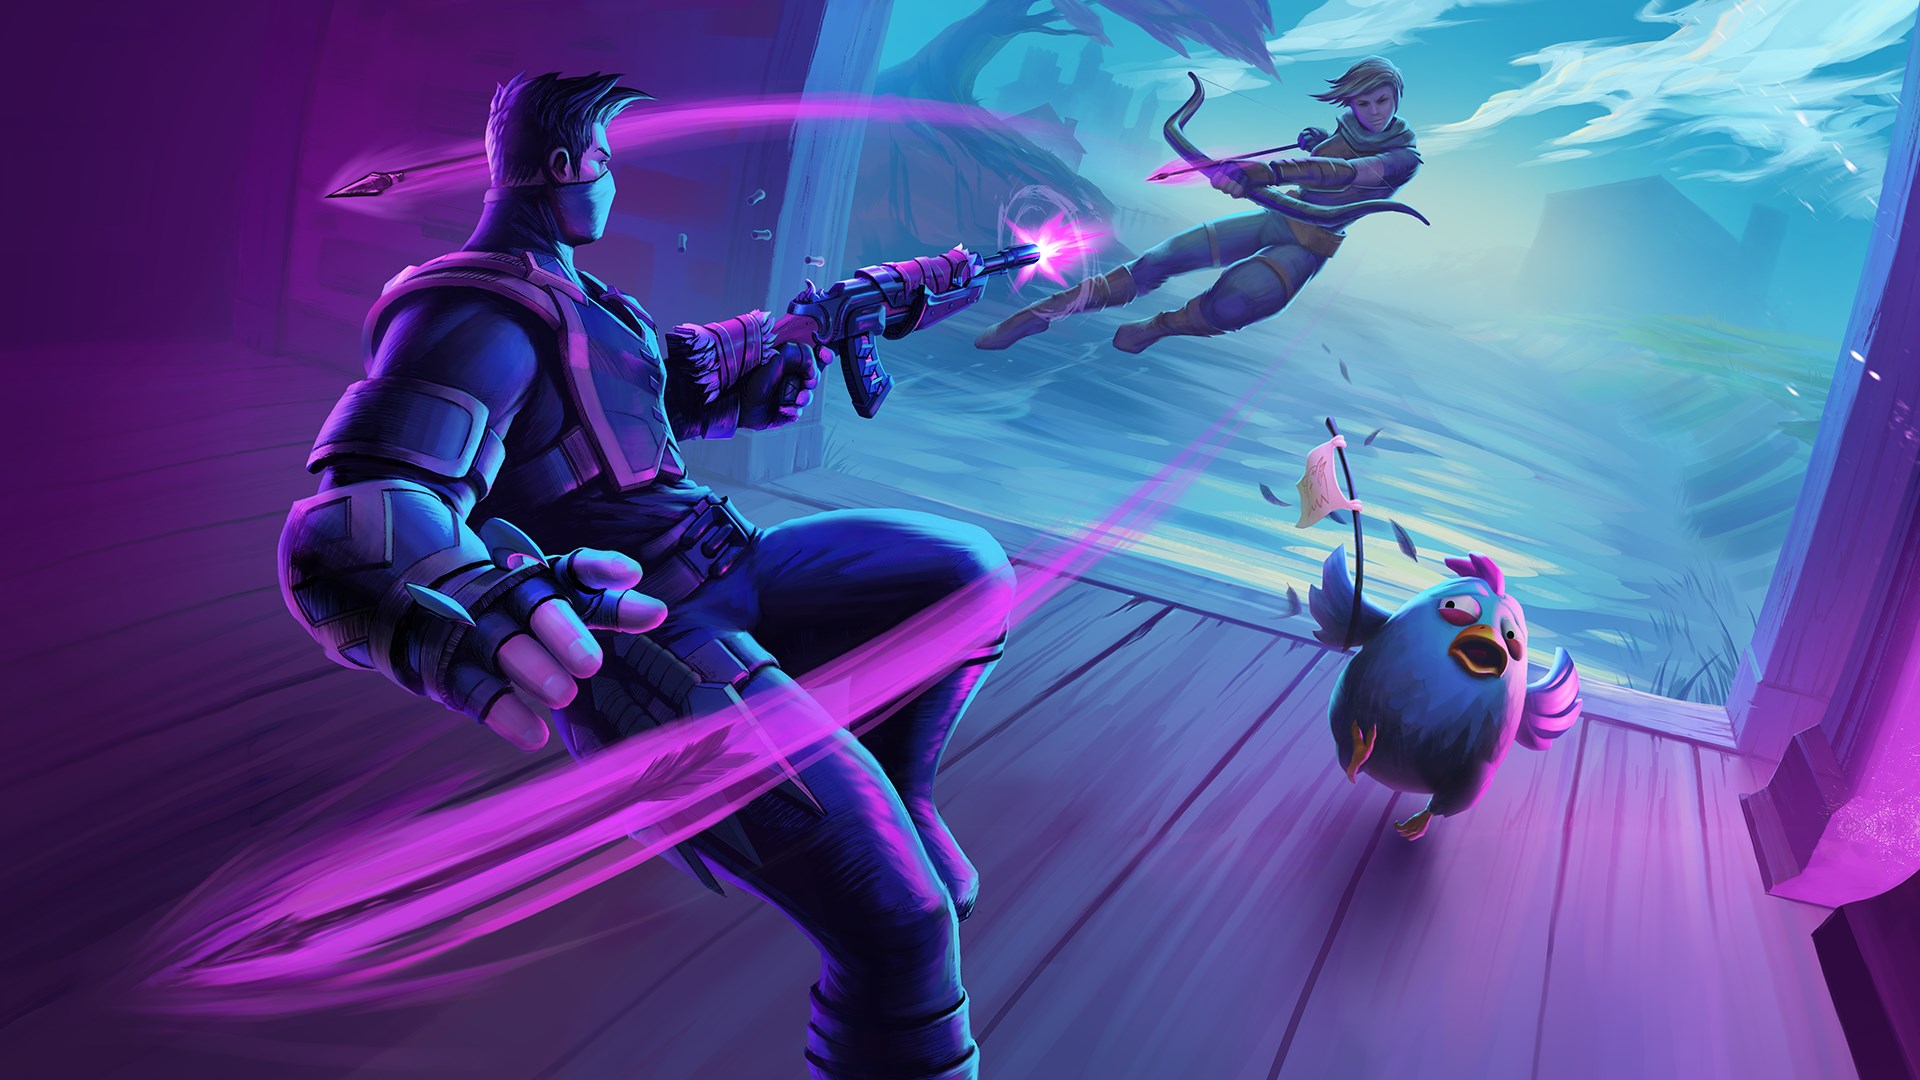 Buy Realm Royale Founder S Pack Microsoft Store